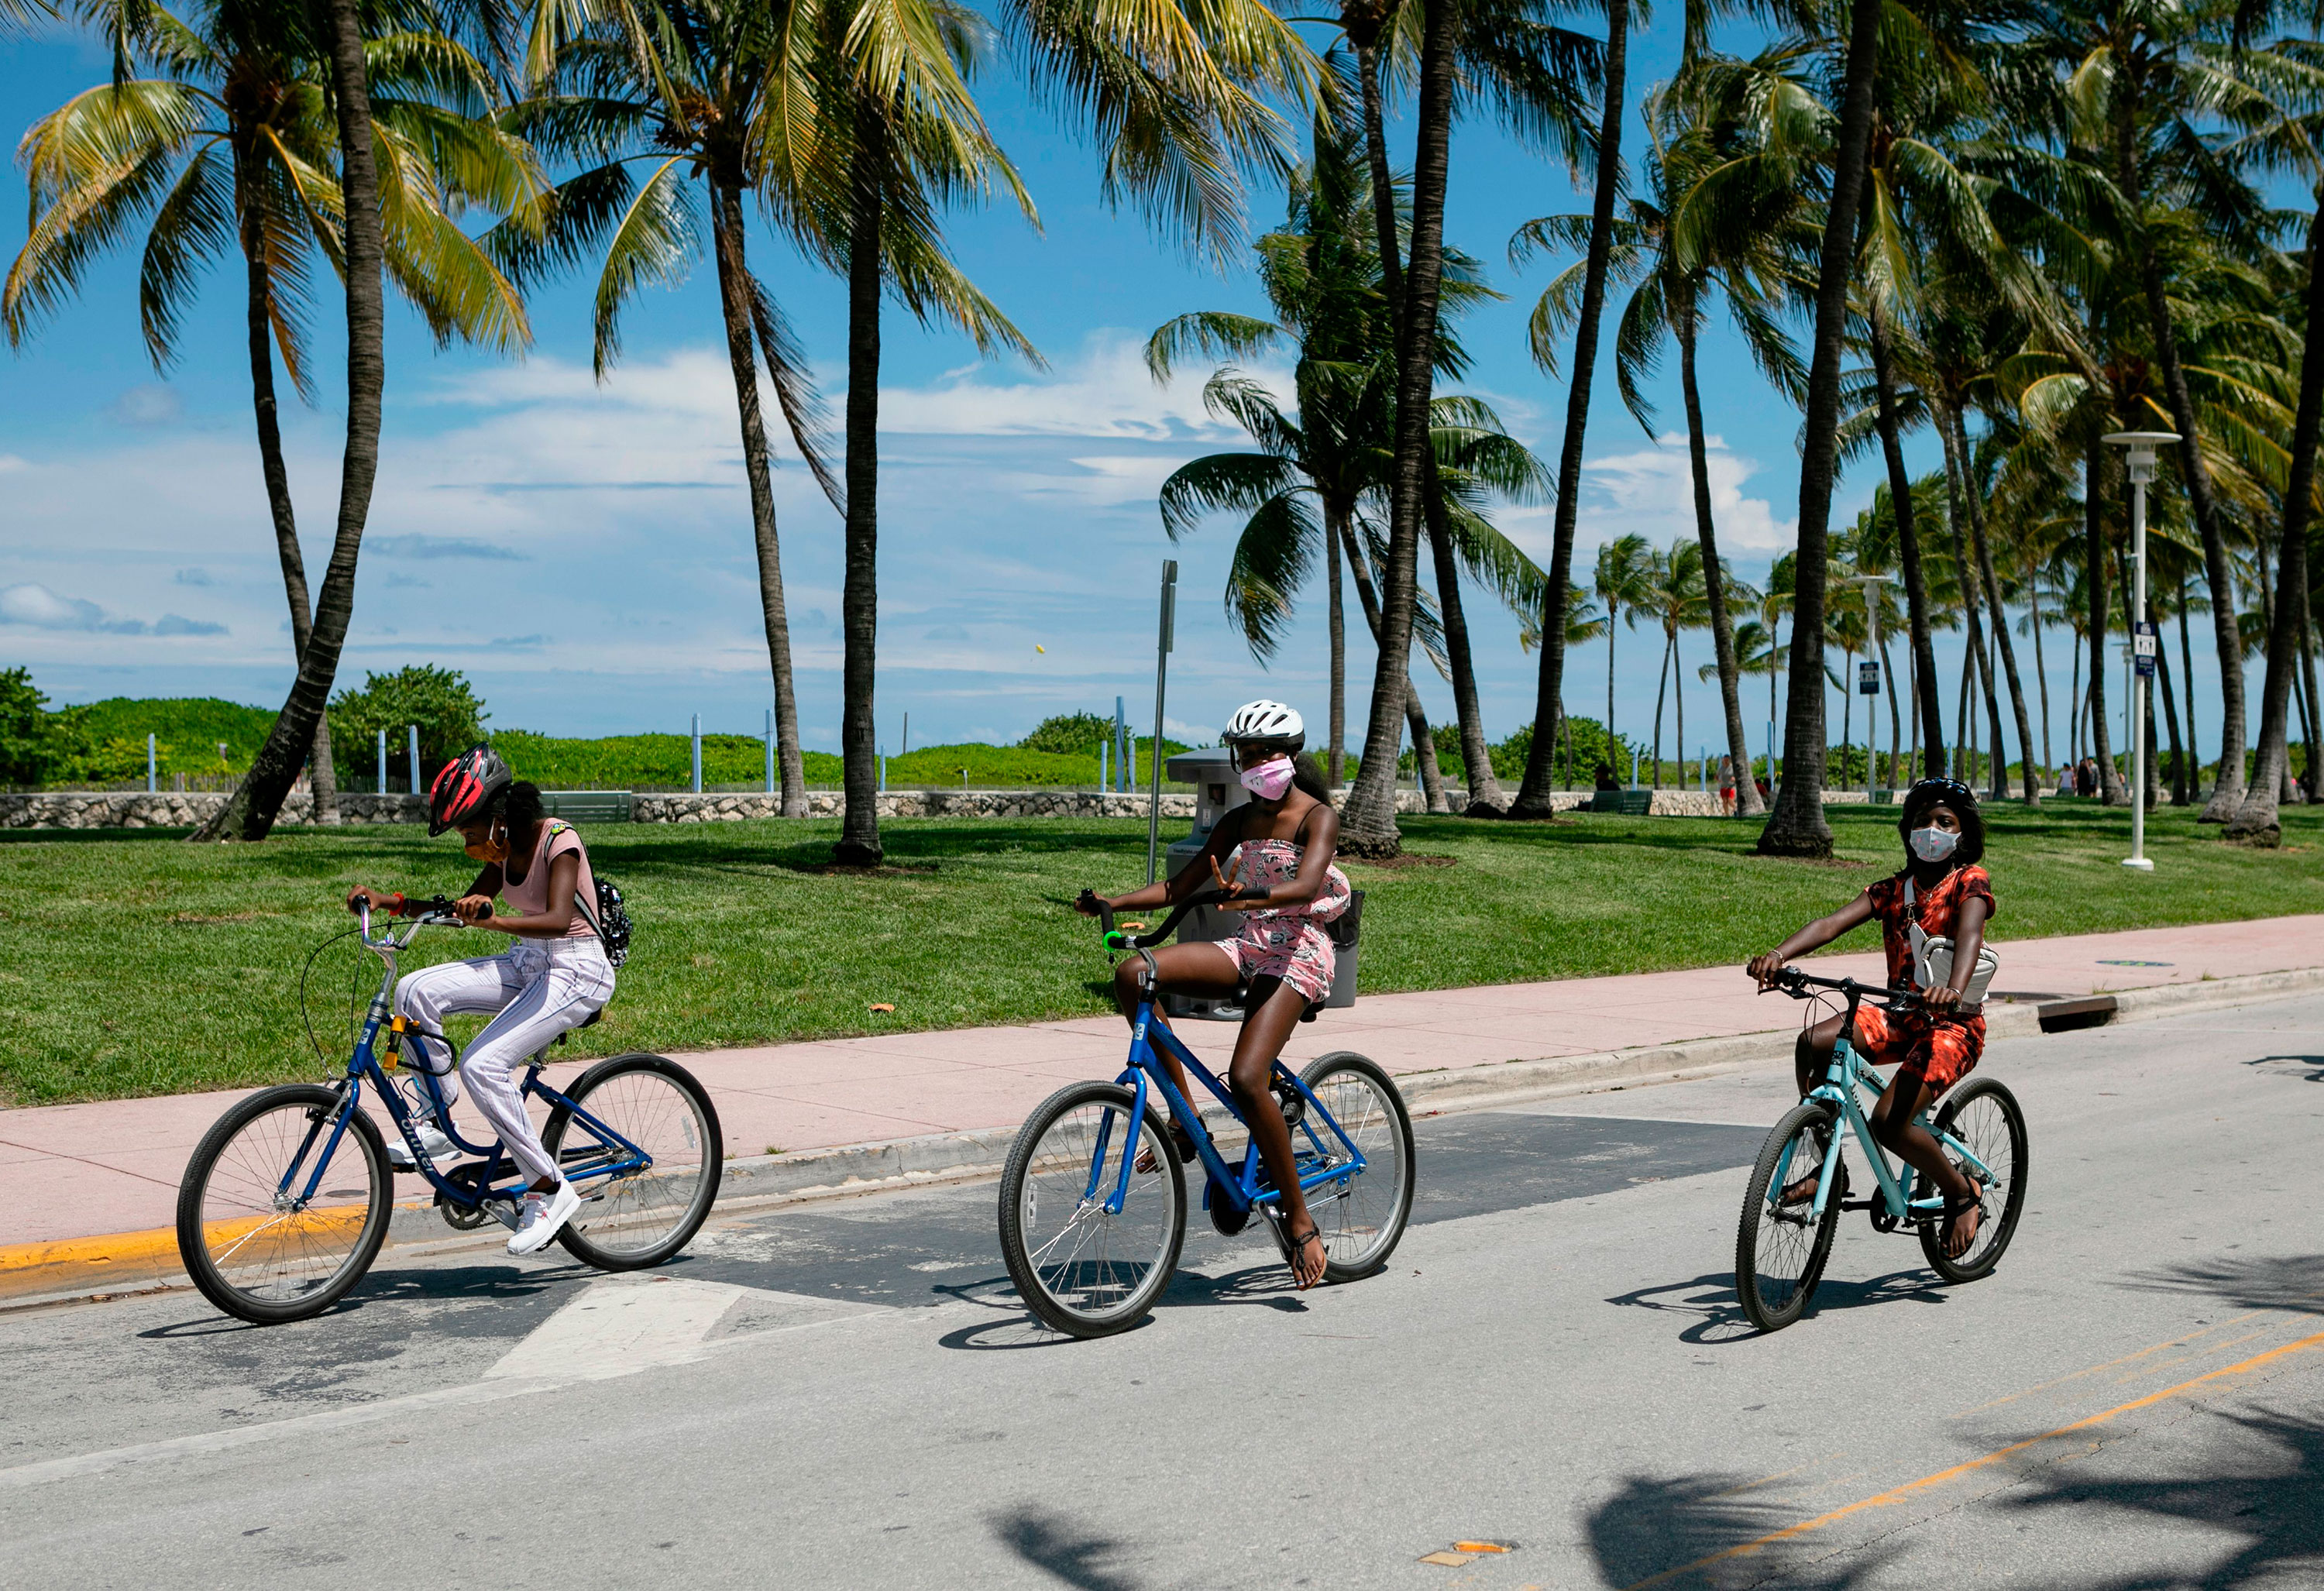 People wear face masks while riding bicycles on Ocean Drive in Miami Beach, Florida, on June 16.